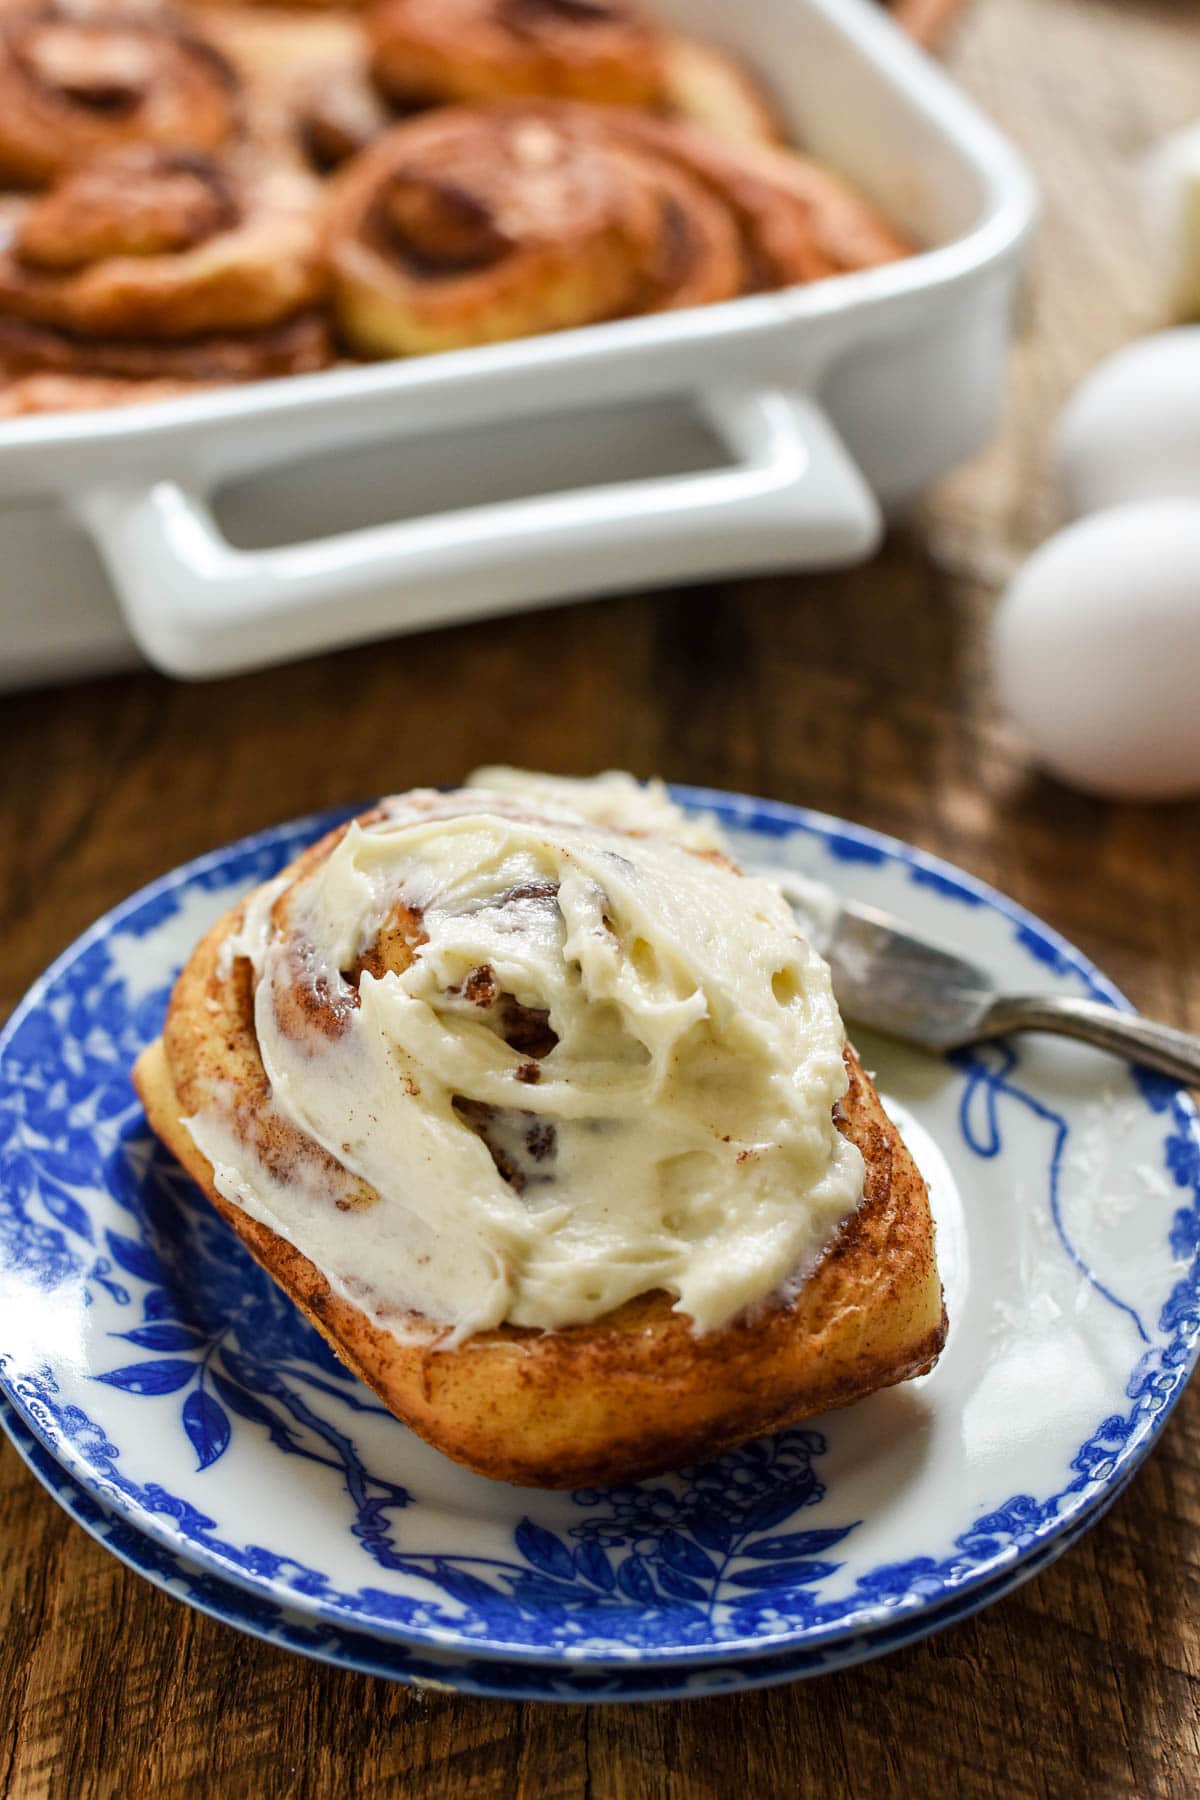 These Overnight Cinnamon Rolls with Cream Cheese Frosting are soft, chewy, and loaded with cinnamon flavor! The ultimate make ahead breakfast recipe.